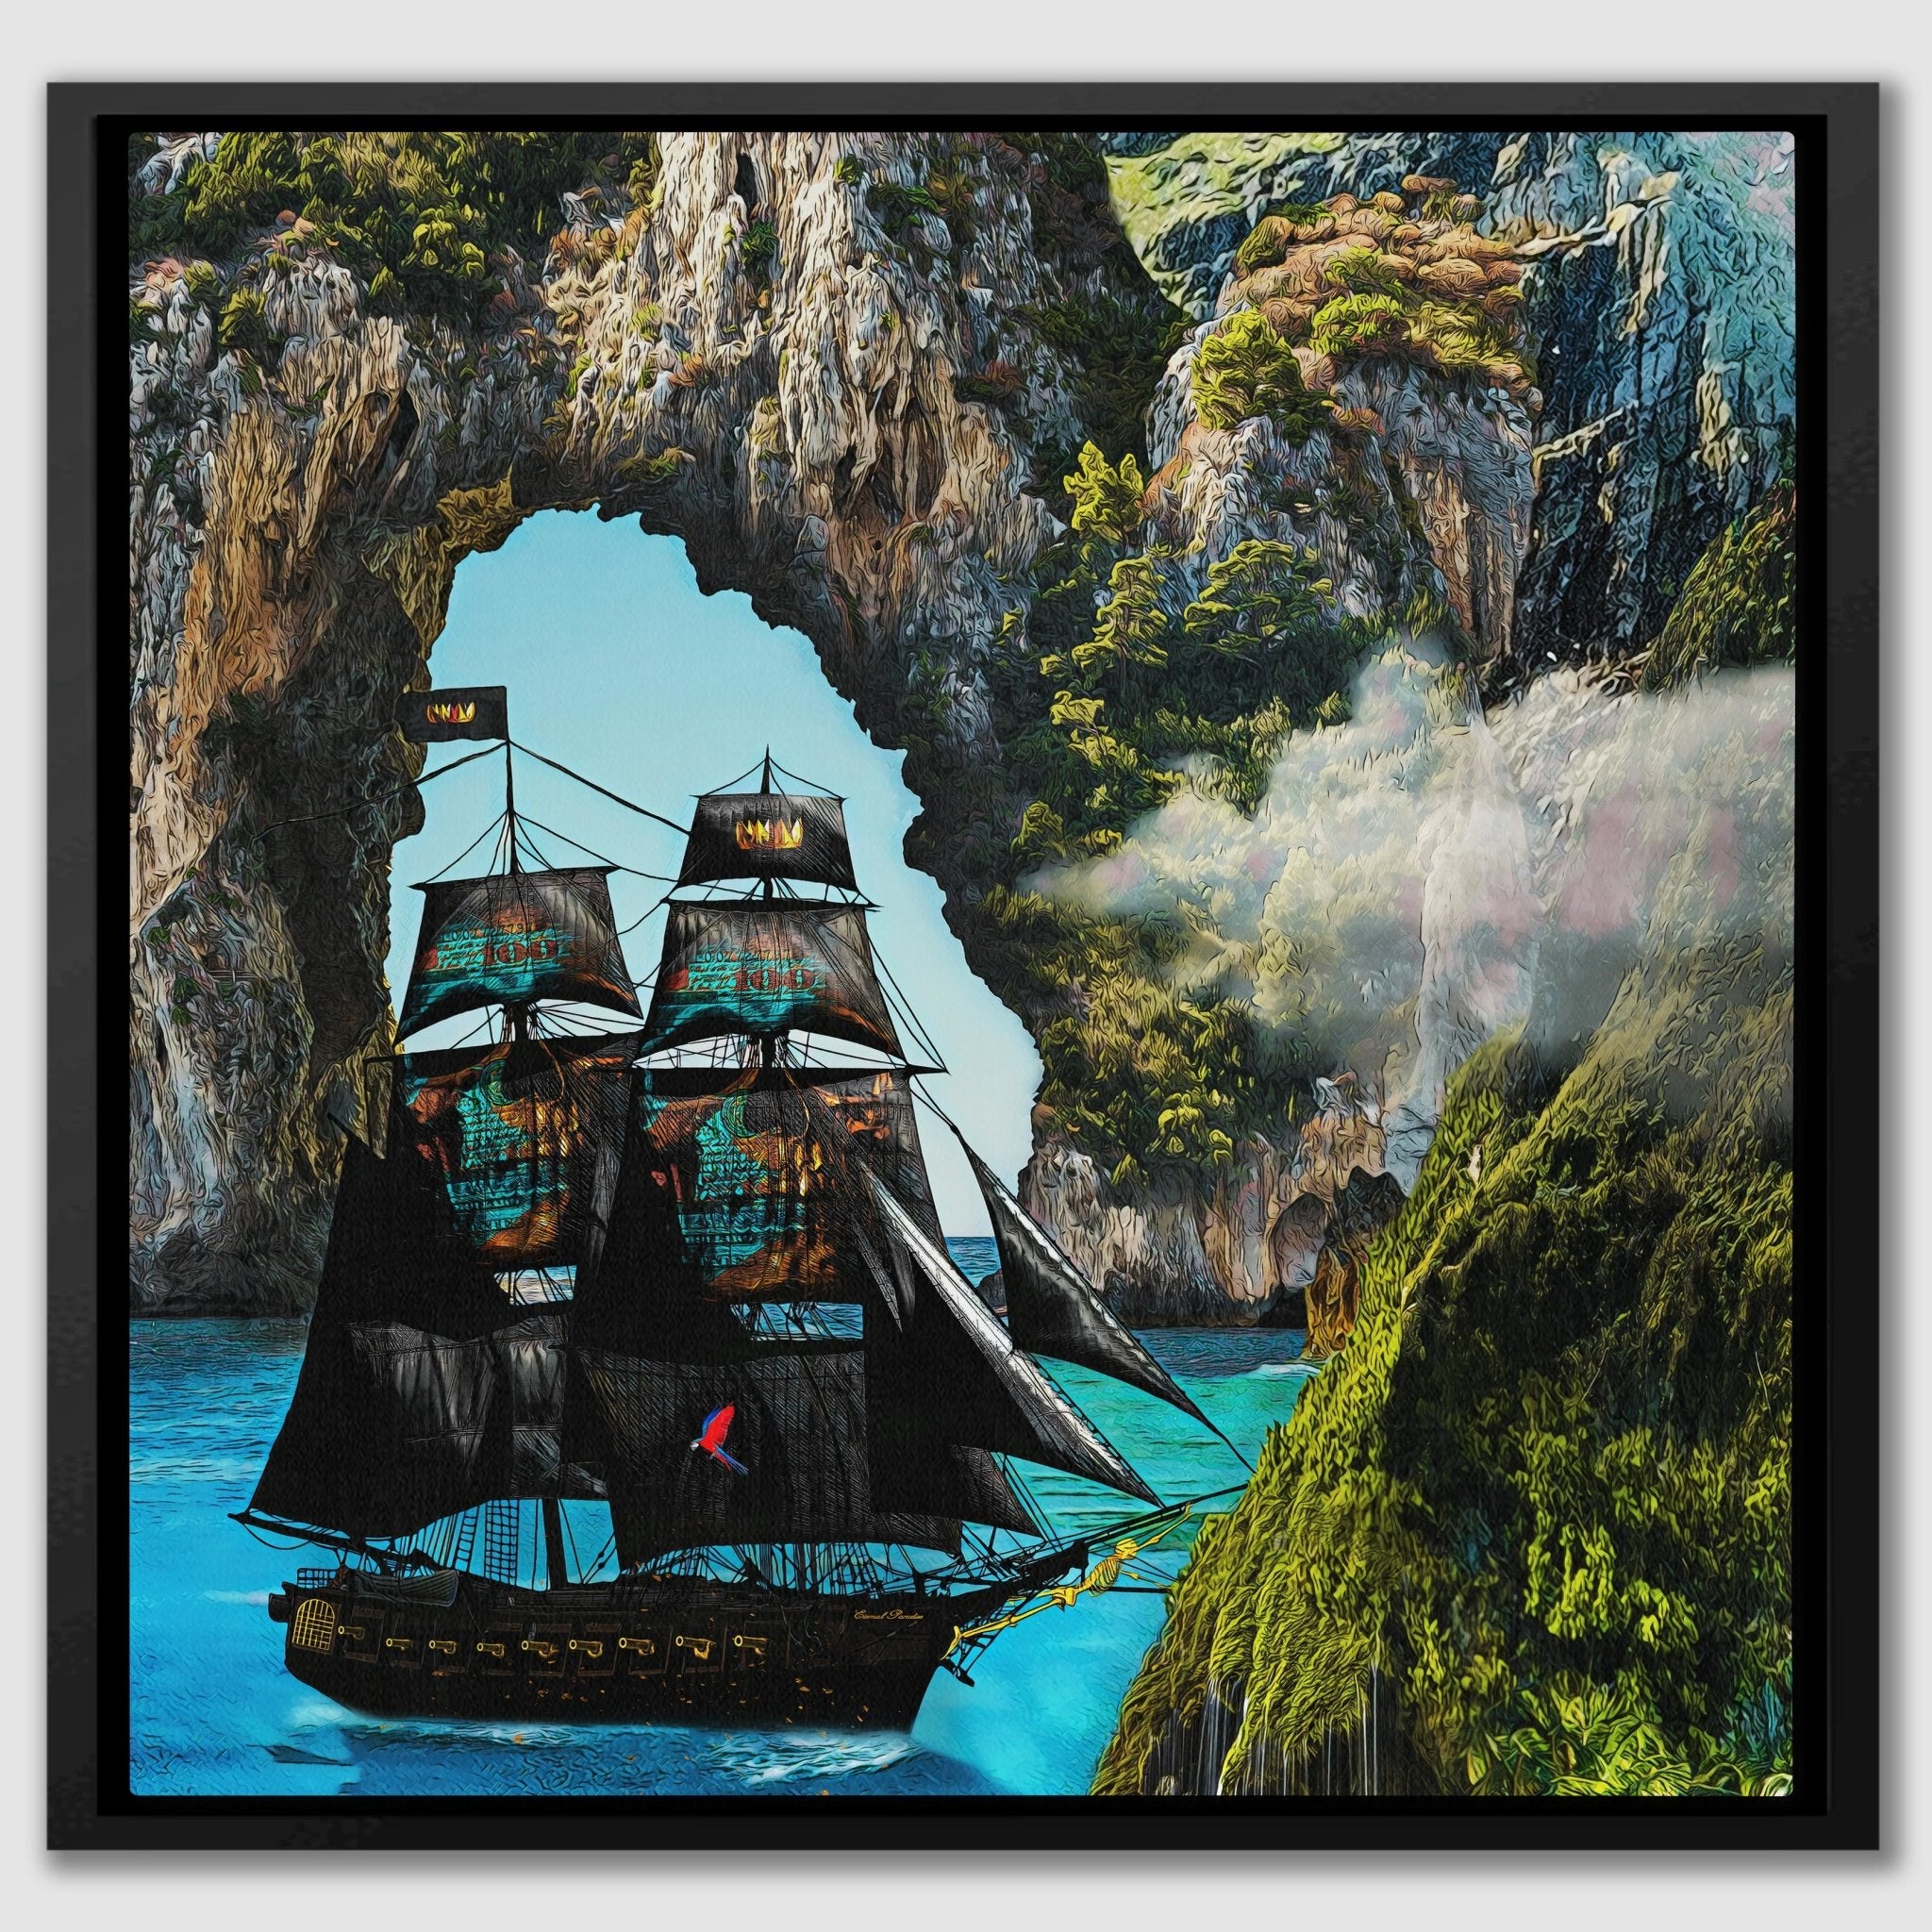 The Money Skull Pirate Ship Painting - Blue Ocean Wall Art - Thedopeart